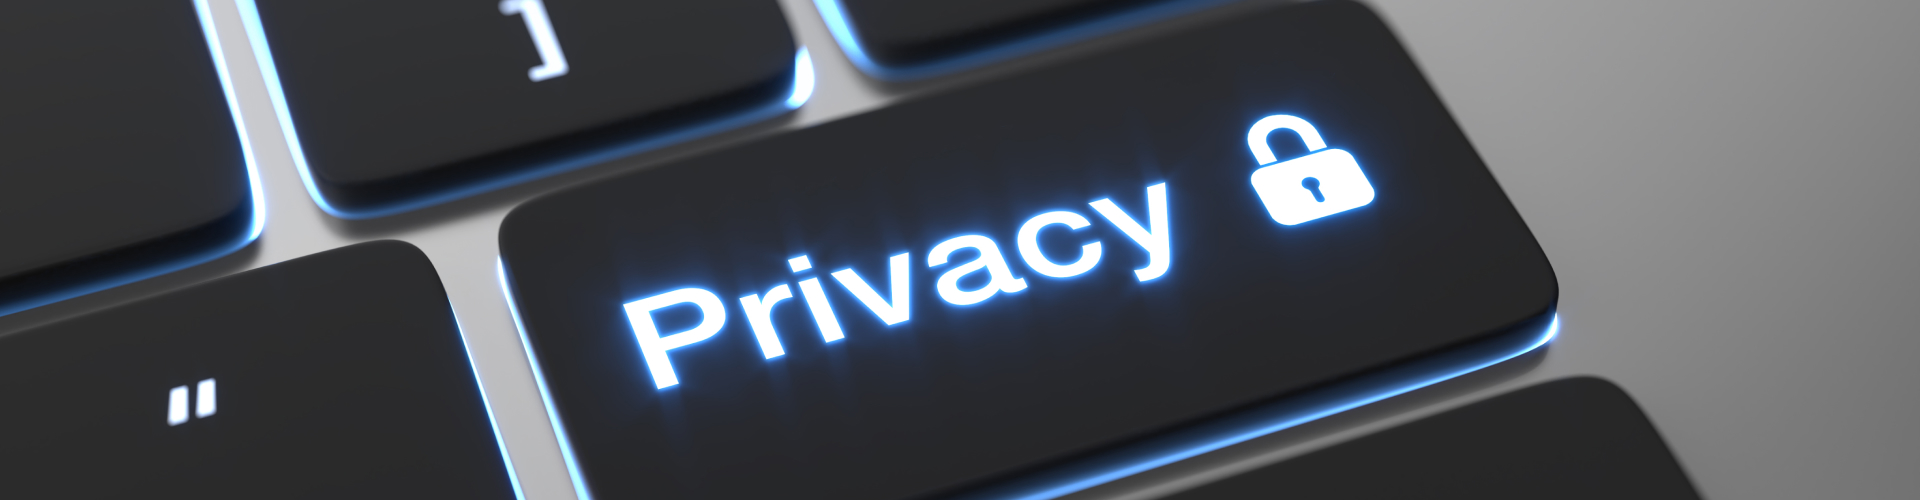 notice-of-privacy-practices